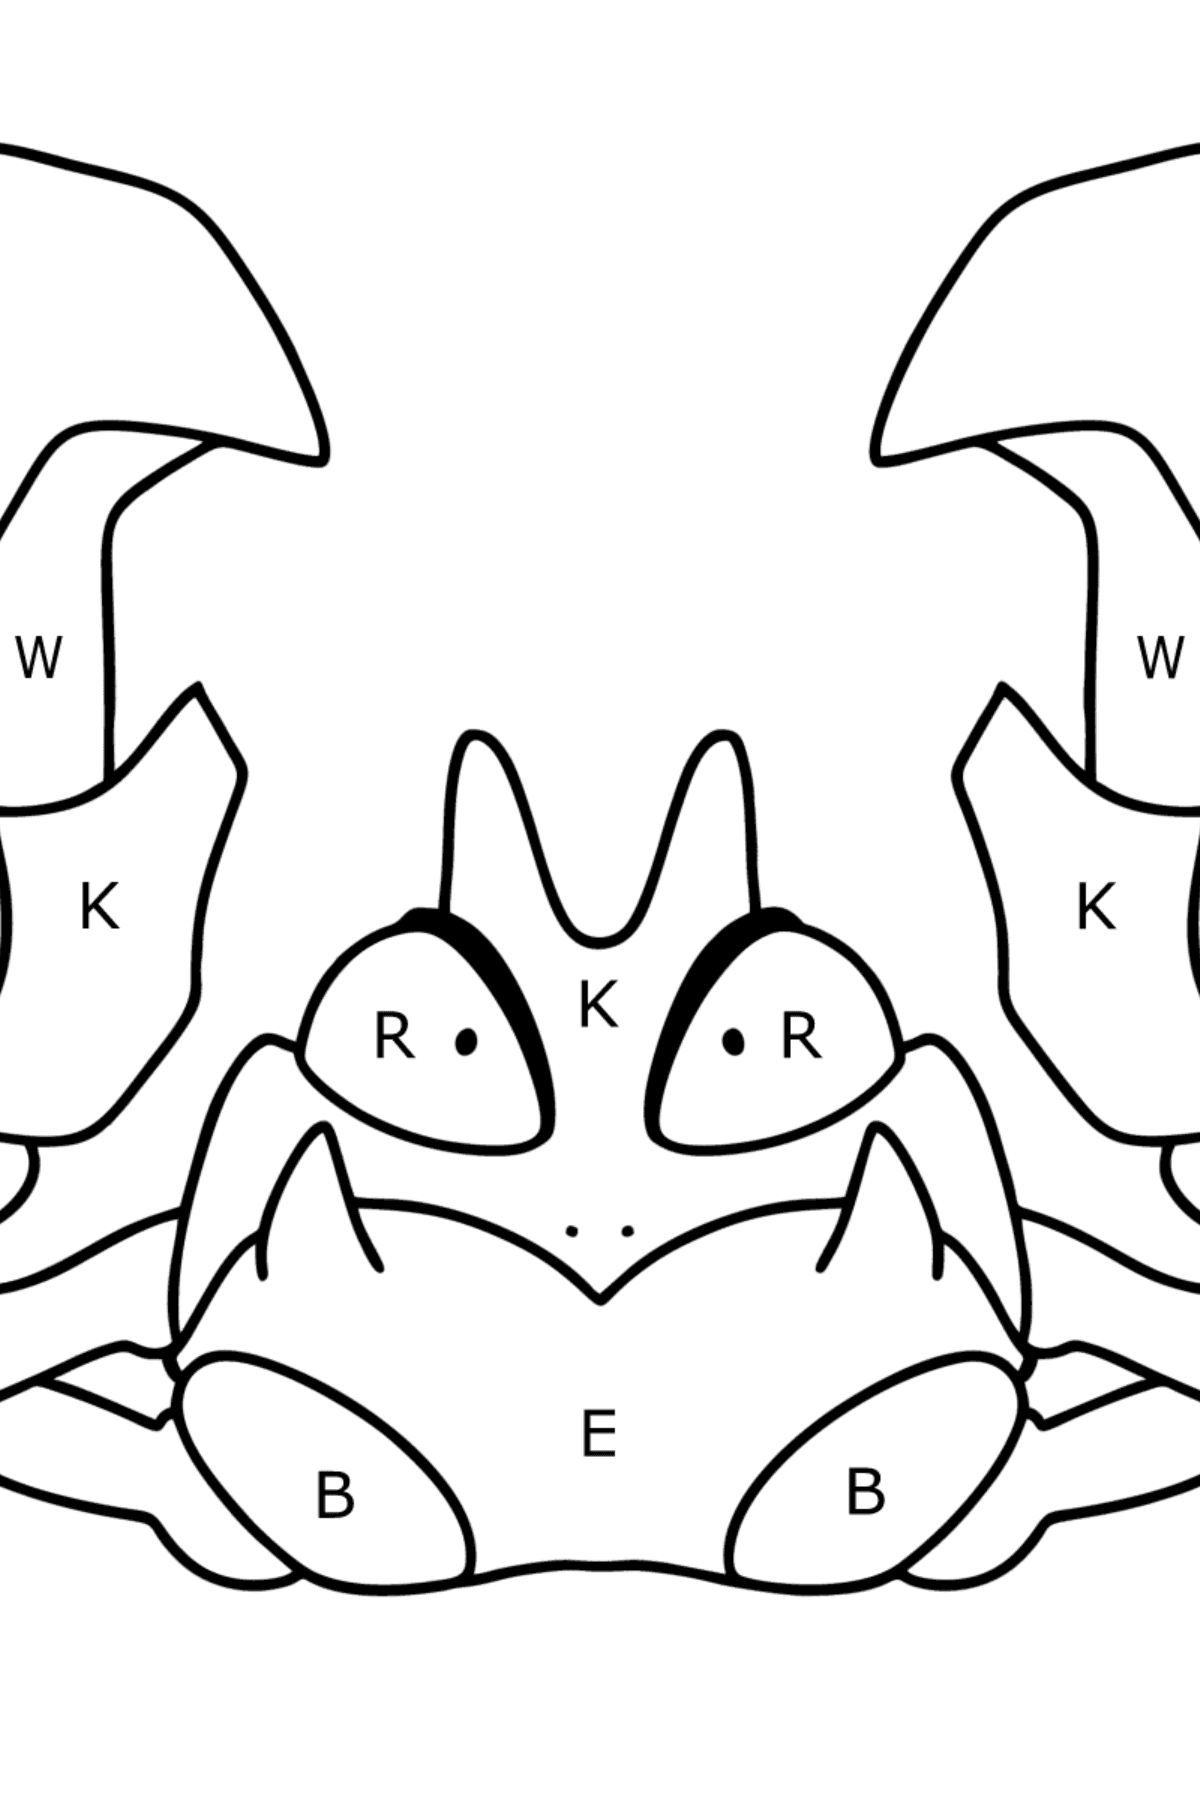 Pokemon Go Krabby coloring page - Coloring by Letters for Kids